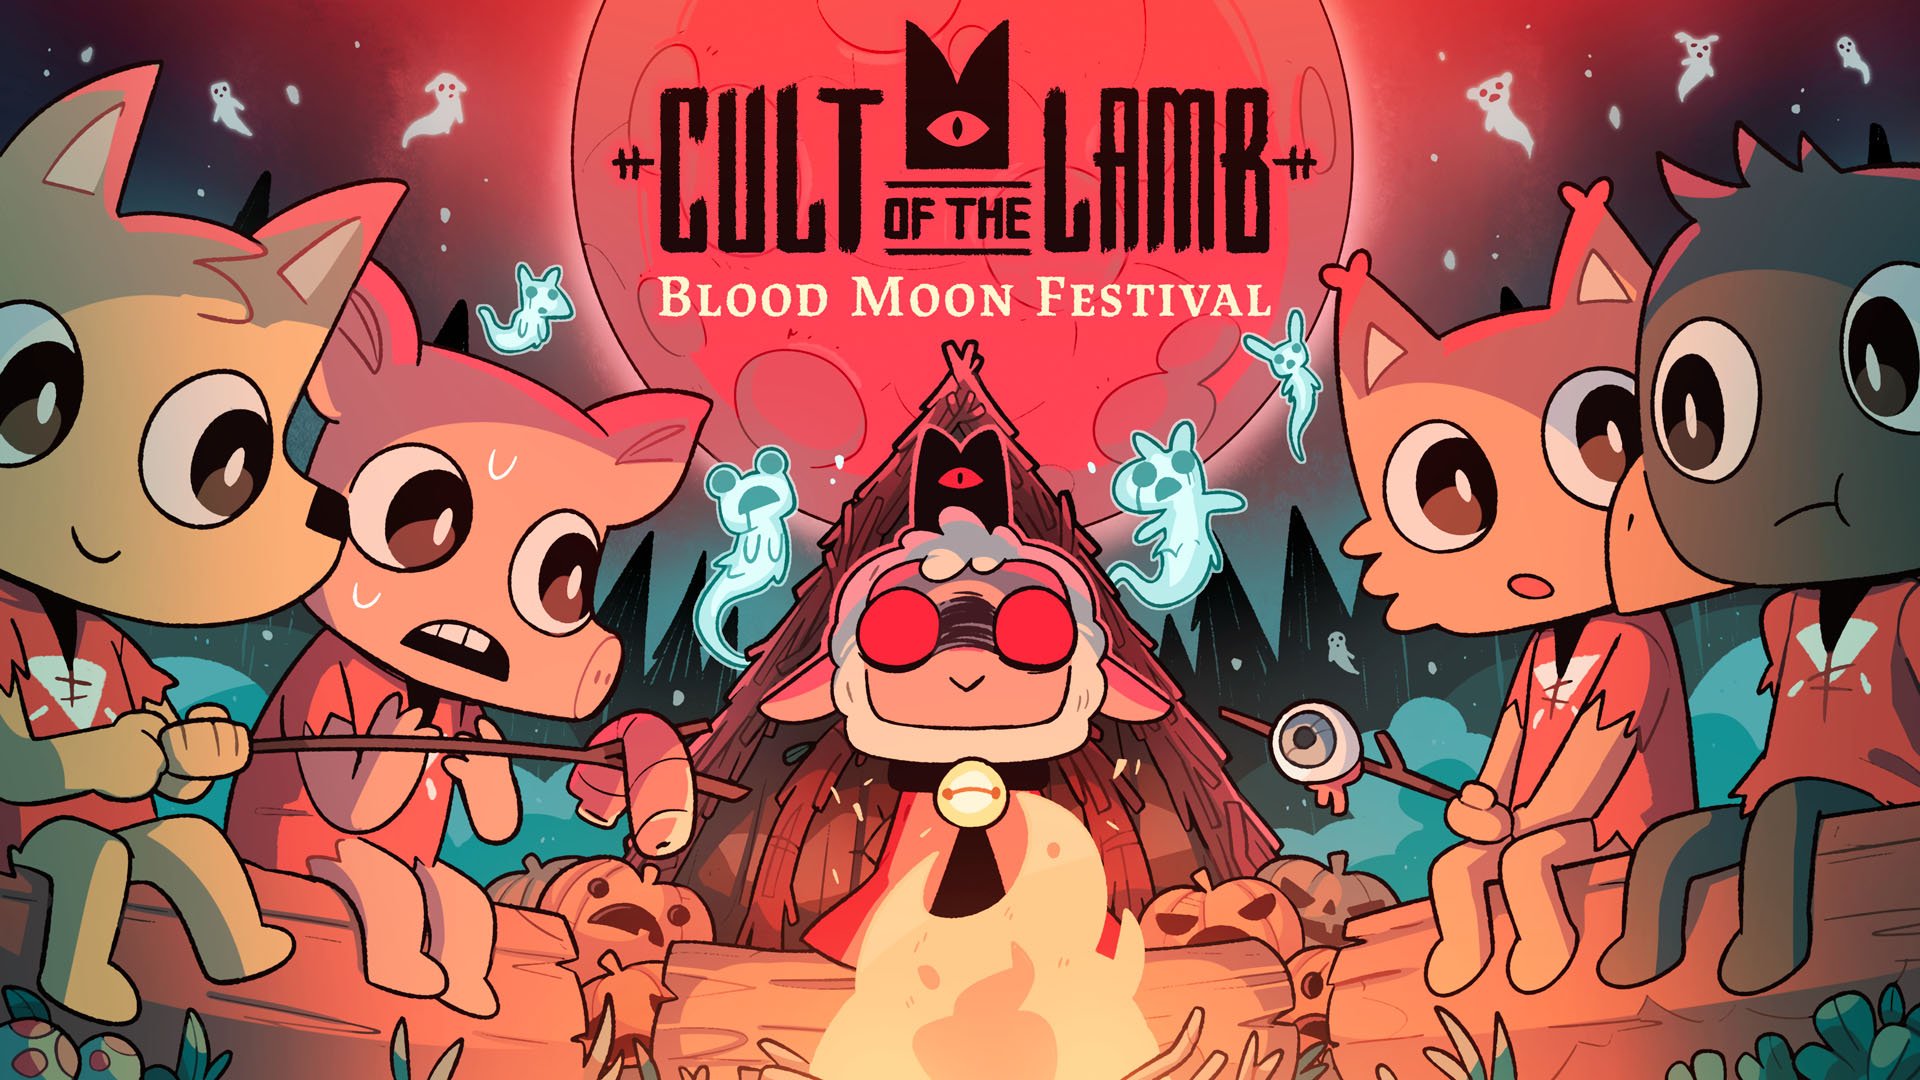 Cult-of-the-Lamb-Cultist - TheSixthAxis